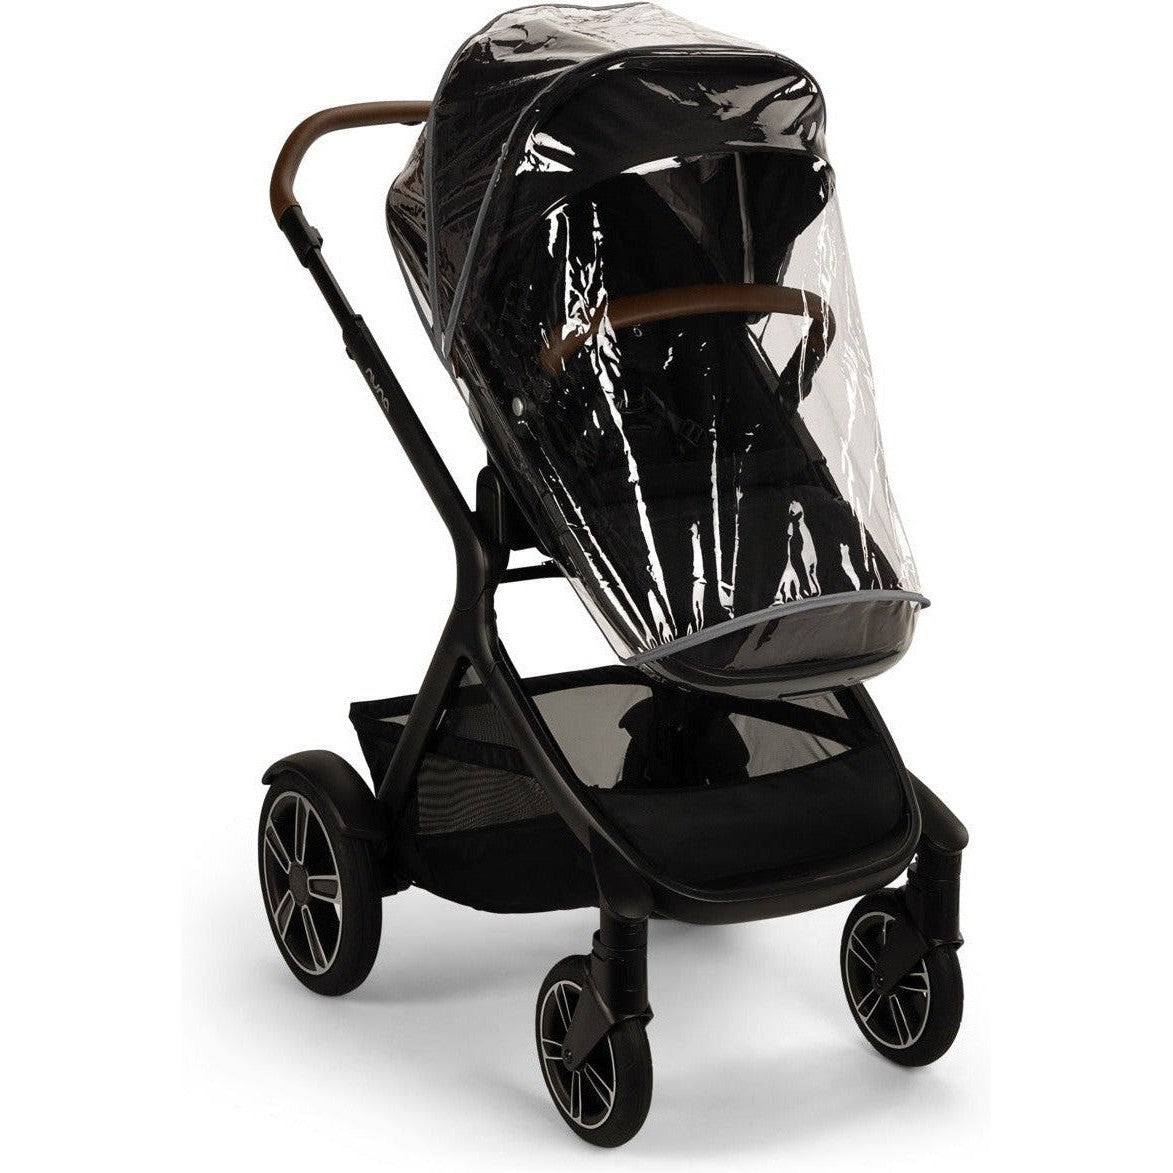 Nuna Demi Next with Travel Board + Pipa Urbn Travel System - Twinkle Twinkle Little One